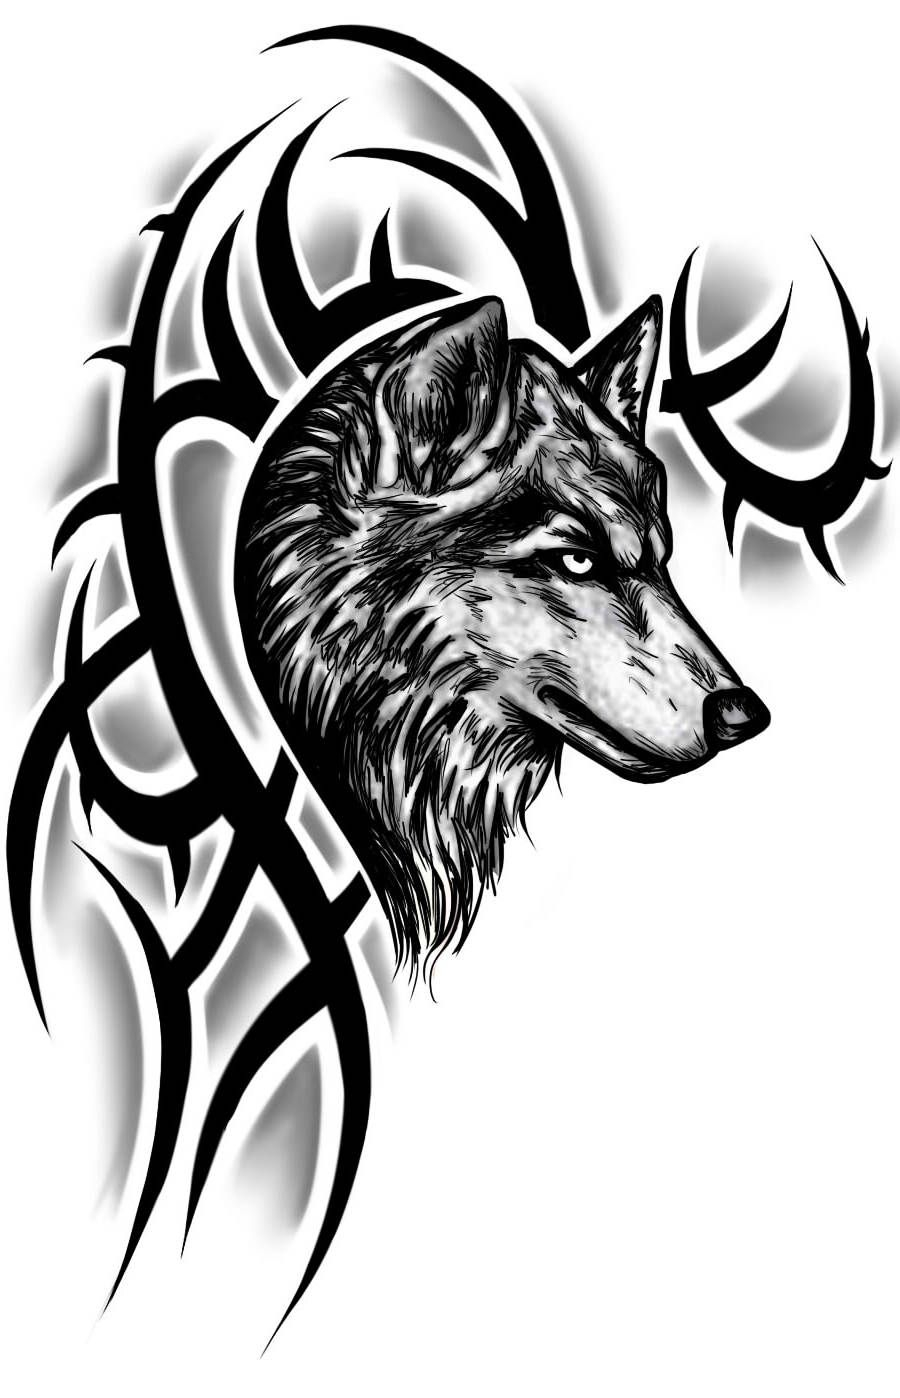 Realistic Wolf Head With Tribal Design Tattoo Sample Tattoos within dimensions 900 X 1398